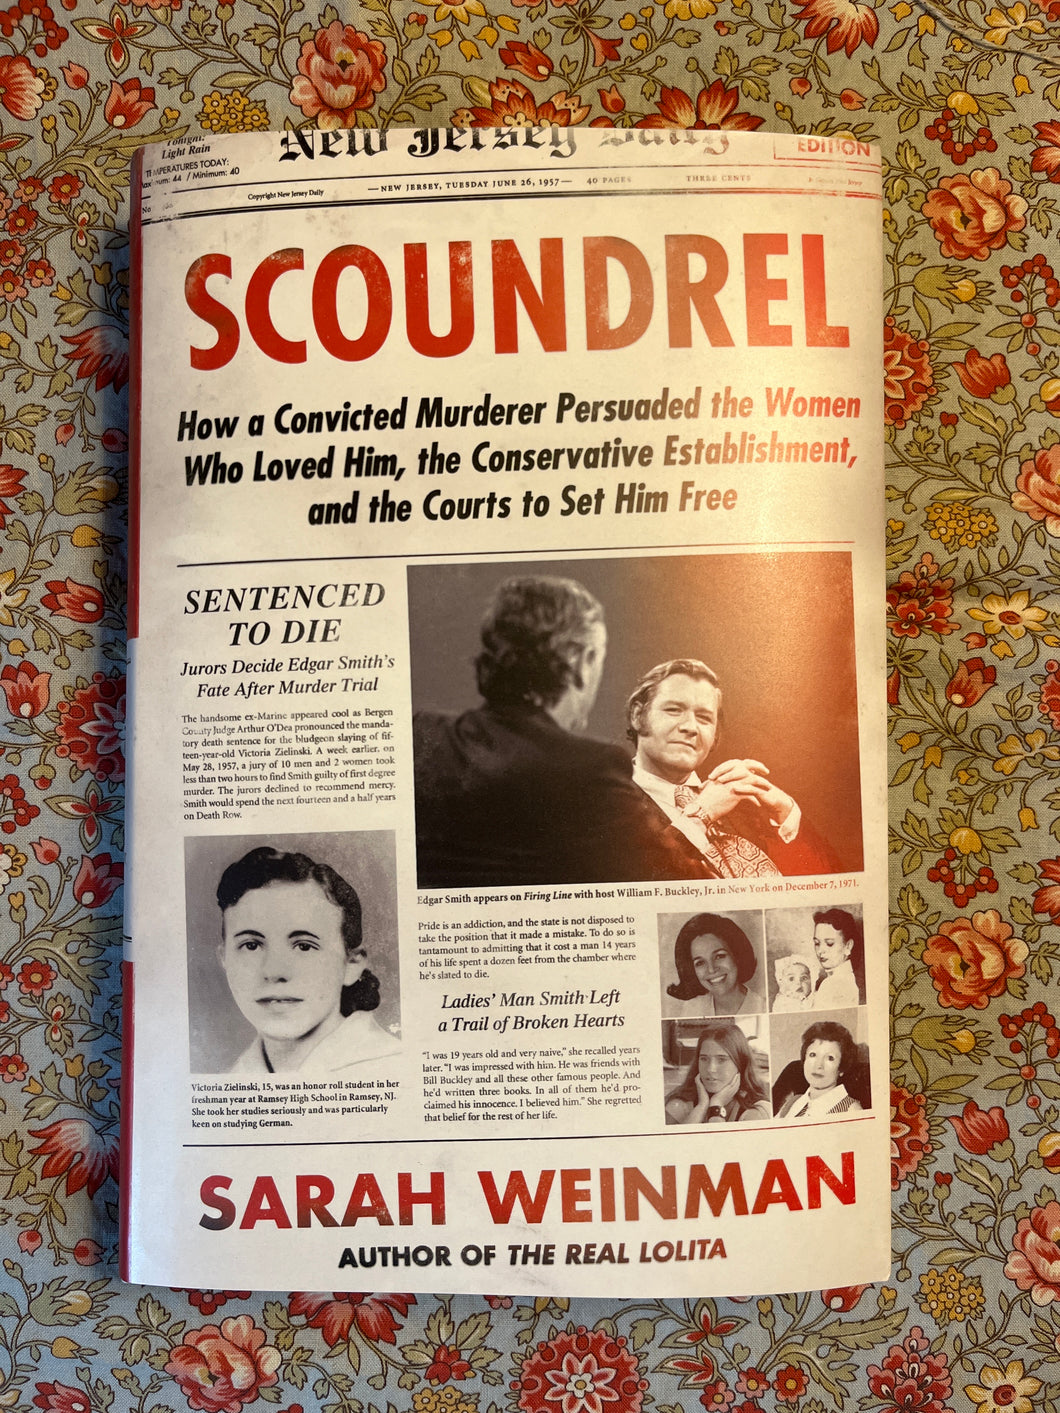 Scoundrel: How a Convicted Murderer Persuaded the Women Who Loved Him, the Conservative Establishment, and the Courts to Set Him Free